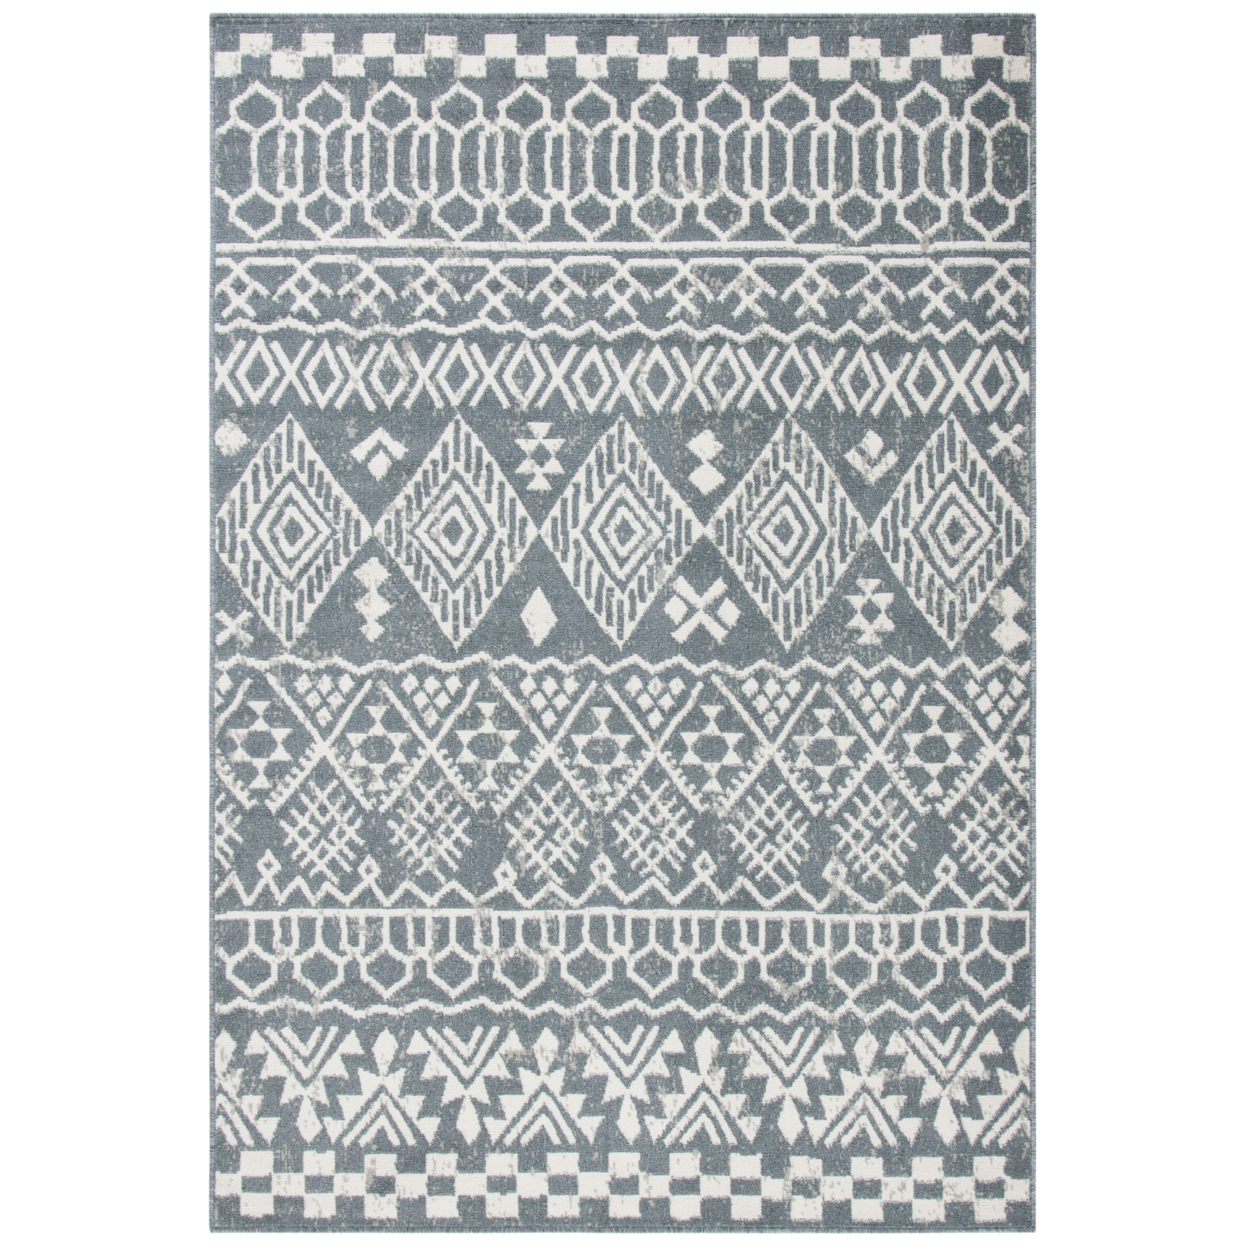 SAFAVIEH Pyramid Collection PYR205A Ivory / Charcoal Rug - 9 X 12